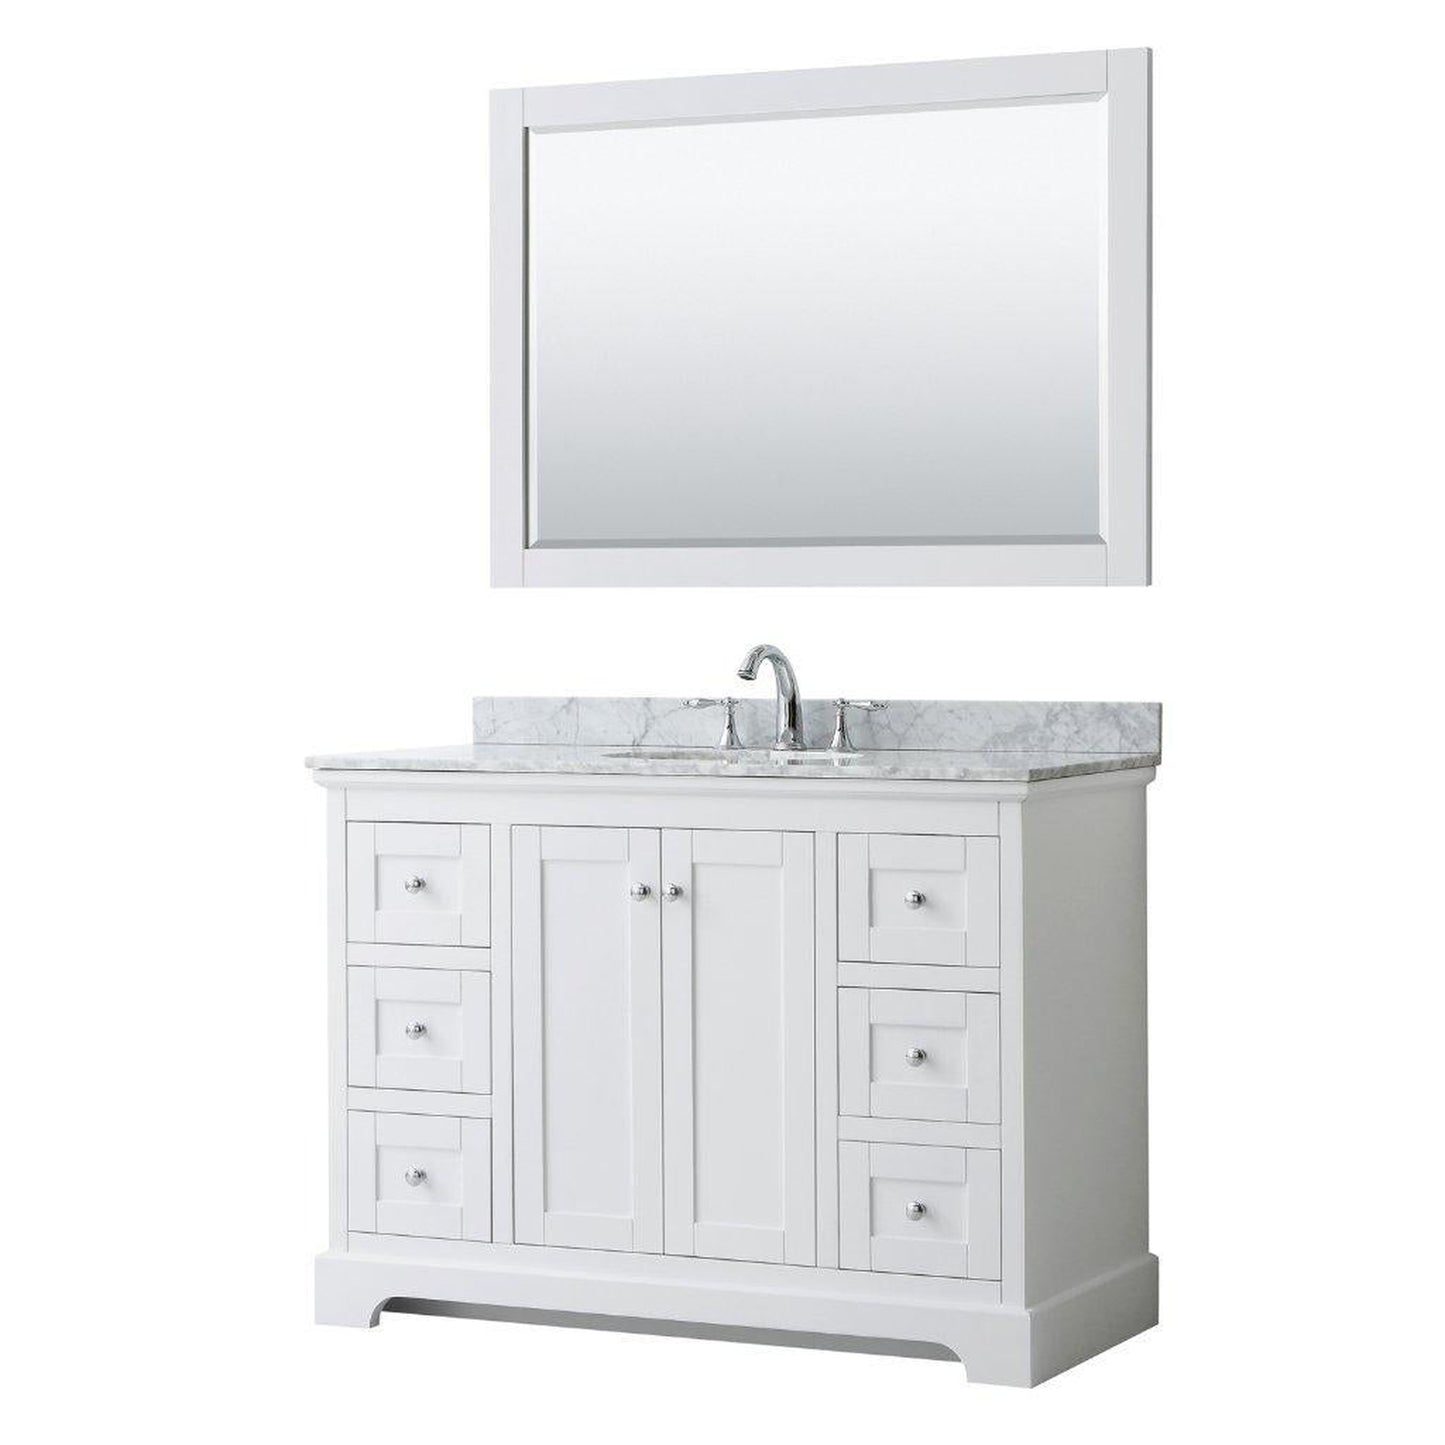 Wyndham Collection Avery 48" White Single Bathroom Vanity Set, White Carrara Marble Countertop With 3-Hole Faucet, 8" Oval Sink, 46" Mirror, Polished Chrome Trims